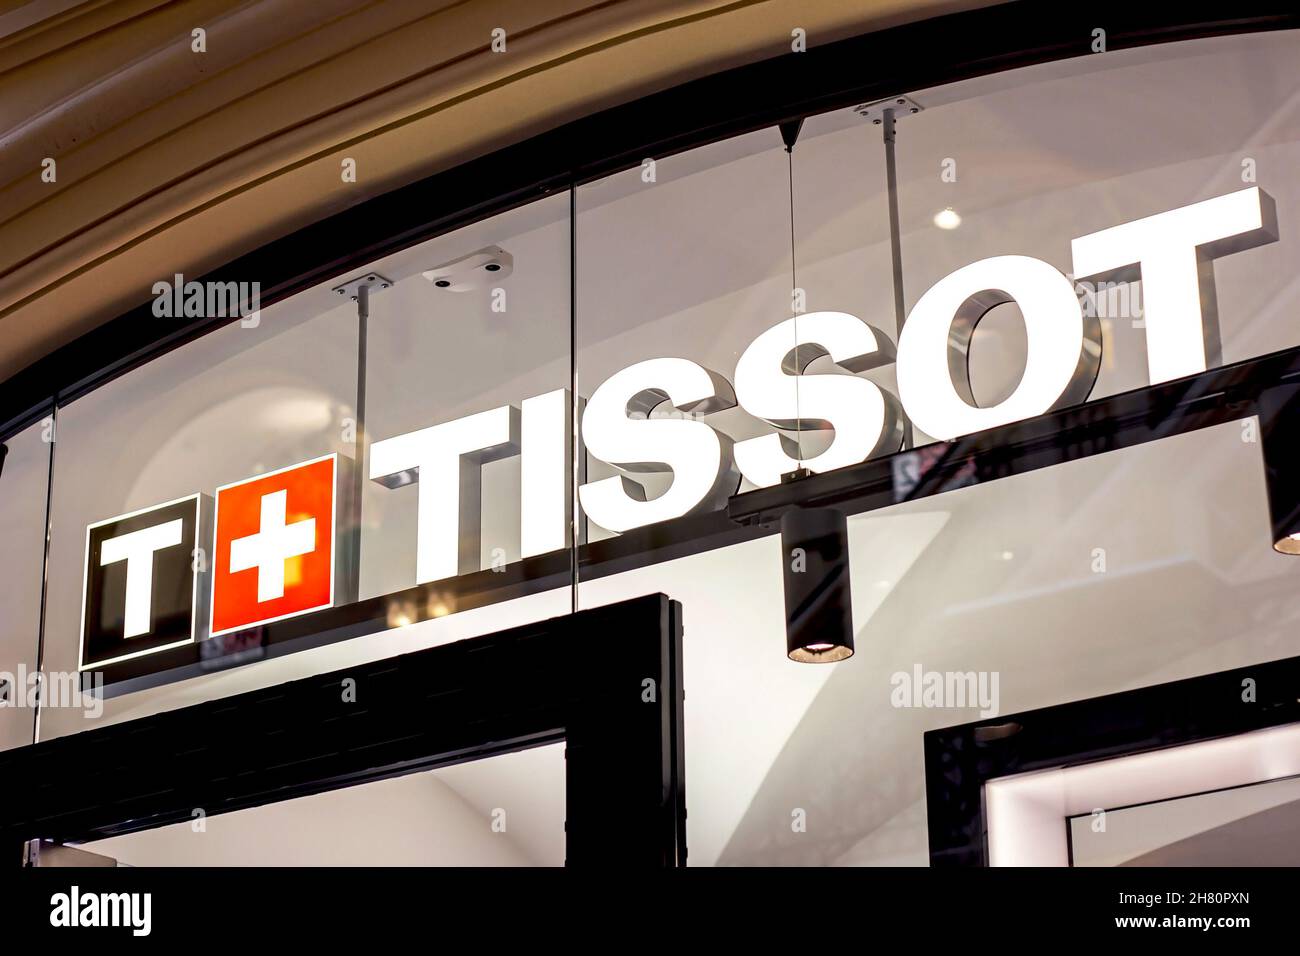 MOSCOW, RUSSIA - AUGUST 10, 2021: Tissot brand retail shop logo signboard on the storefront in the shopping mall. Stock Photo